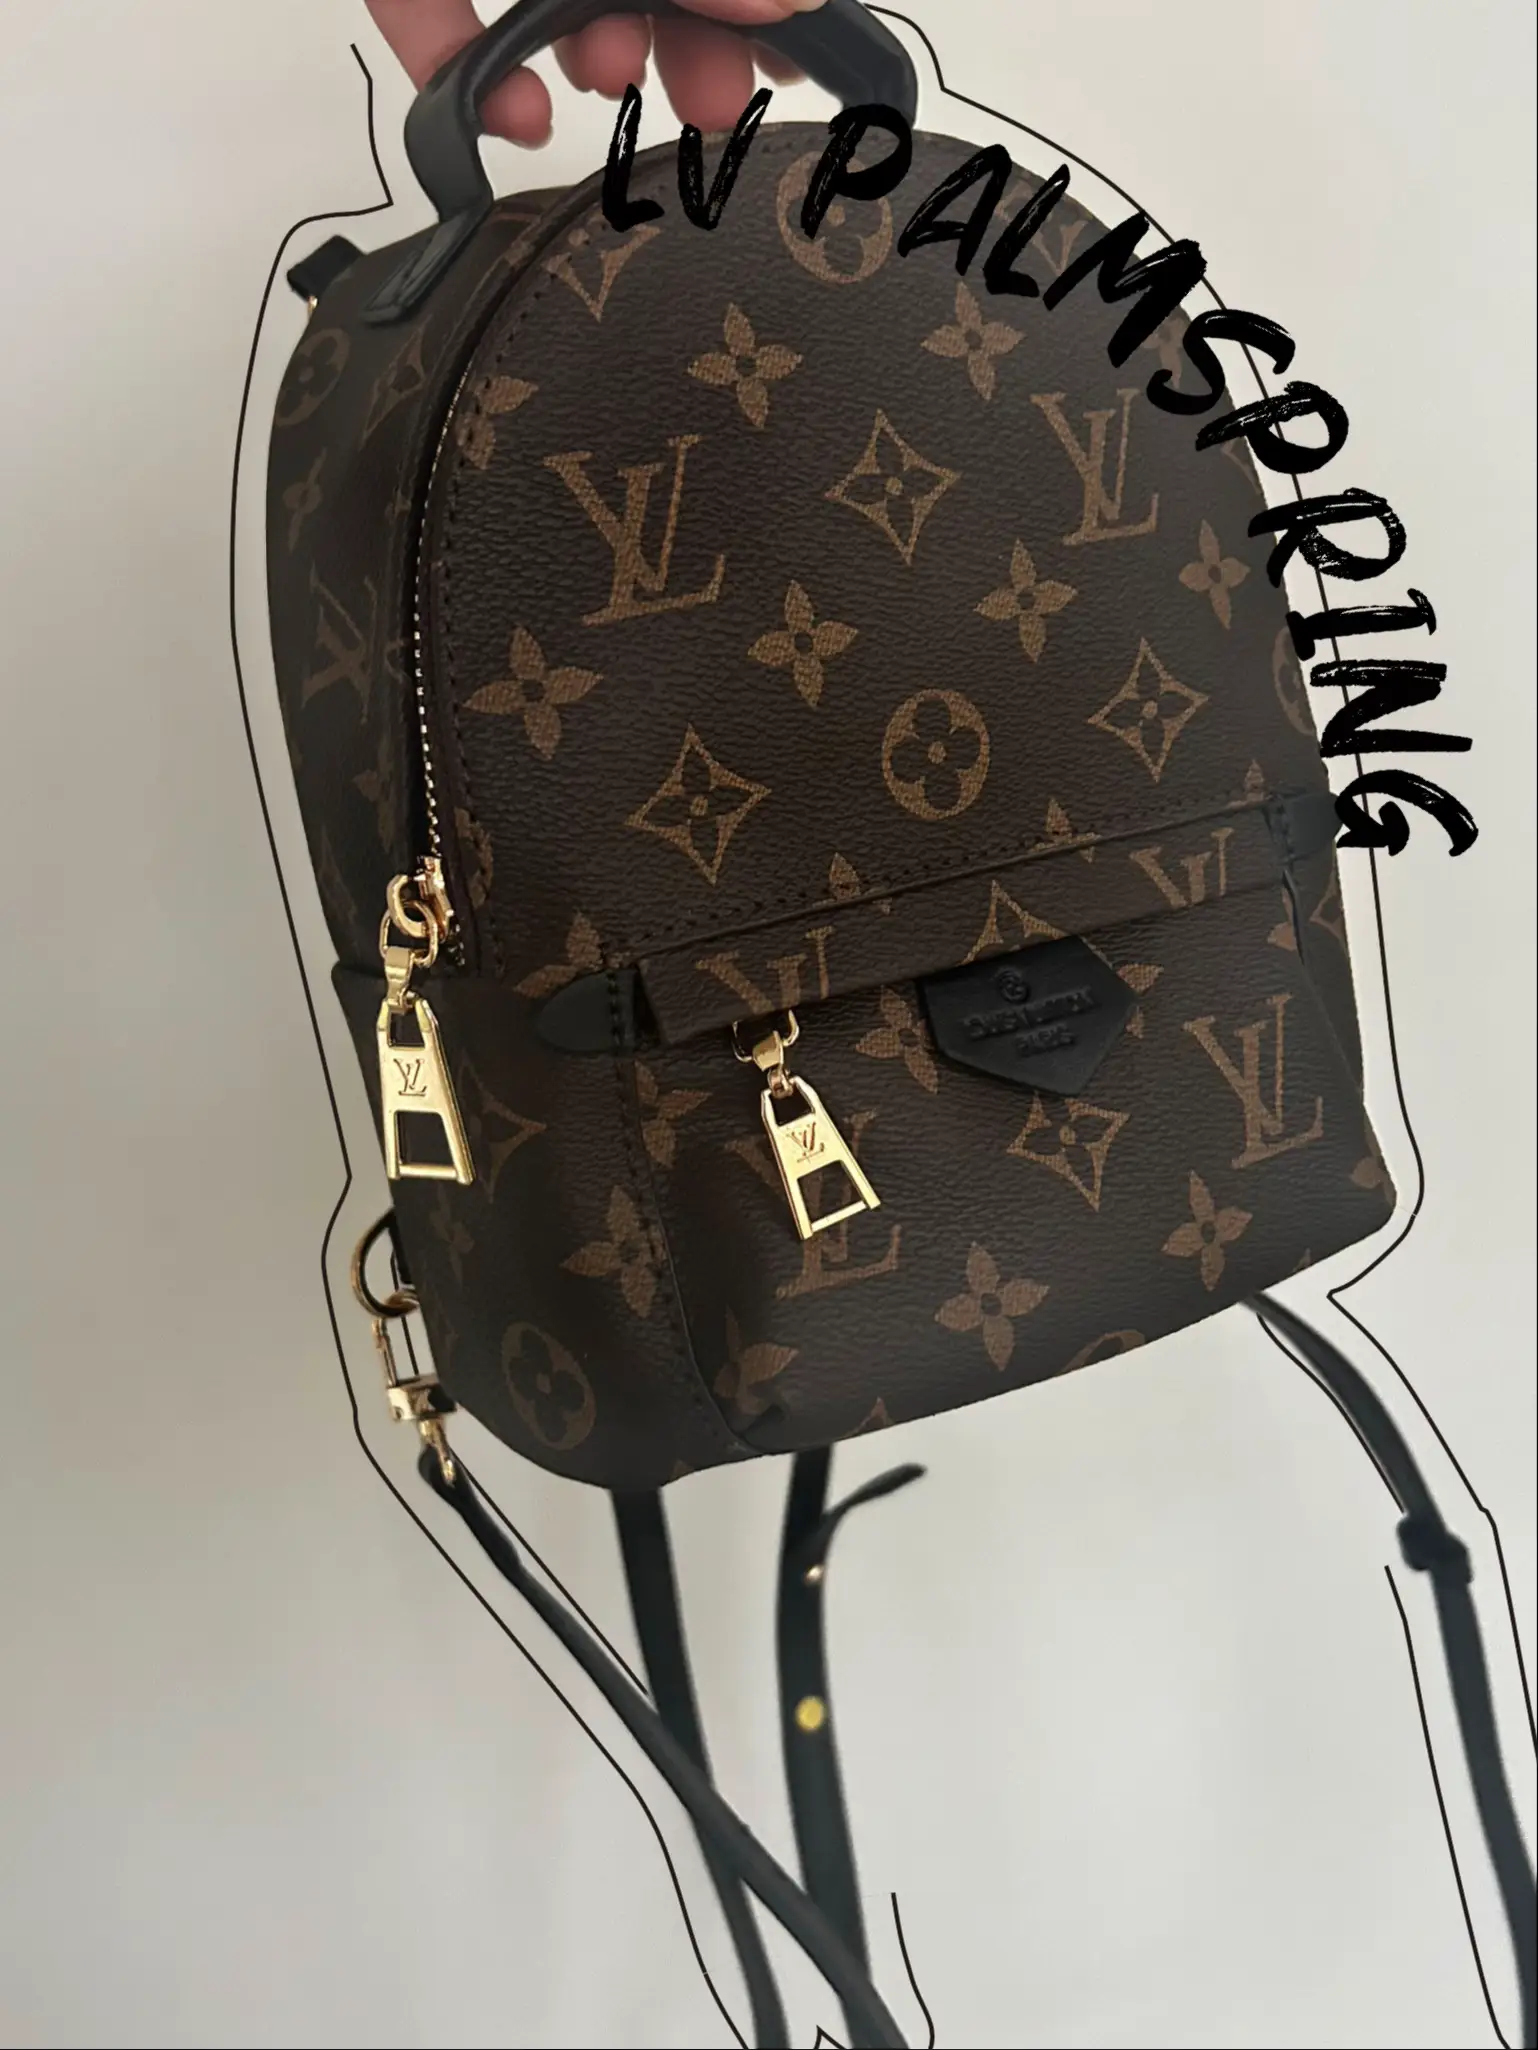 ✨LV PALMSPRING MINI BAG✨, Gallery posted by Royal Babe